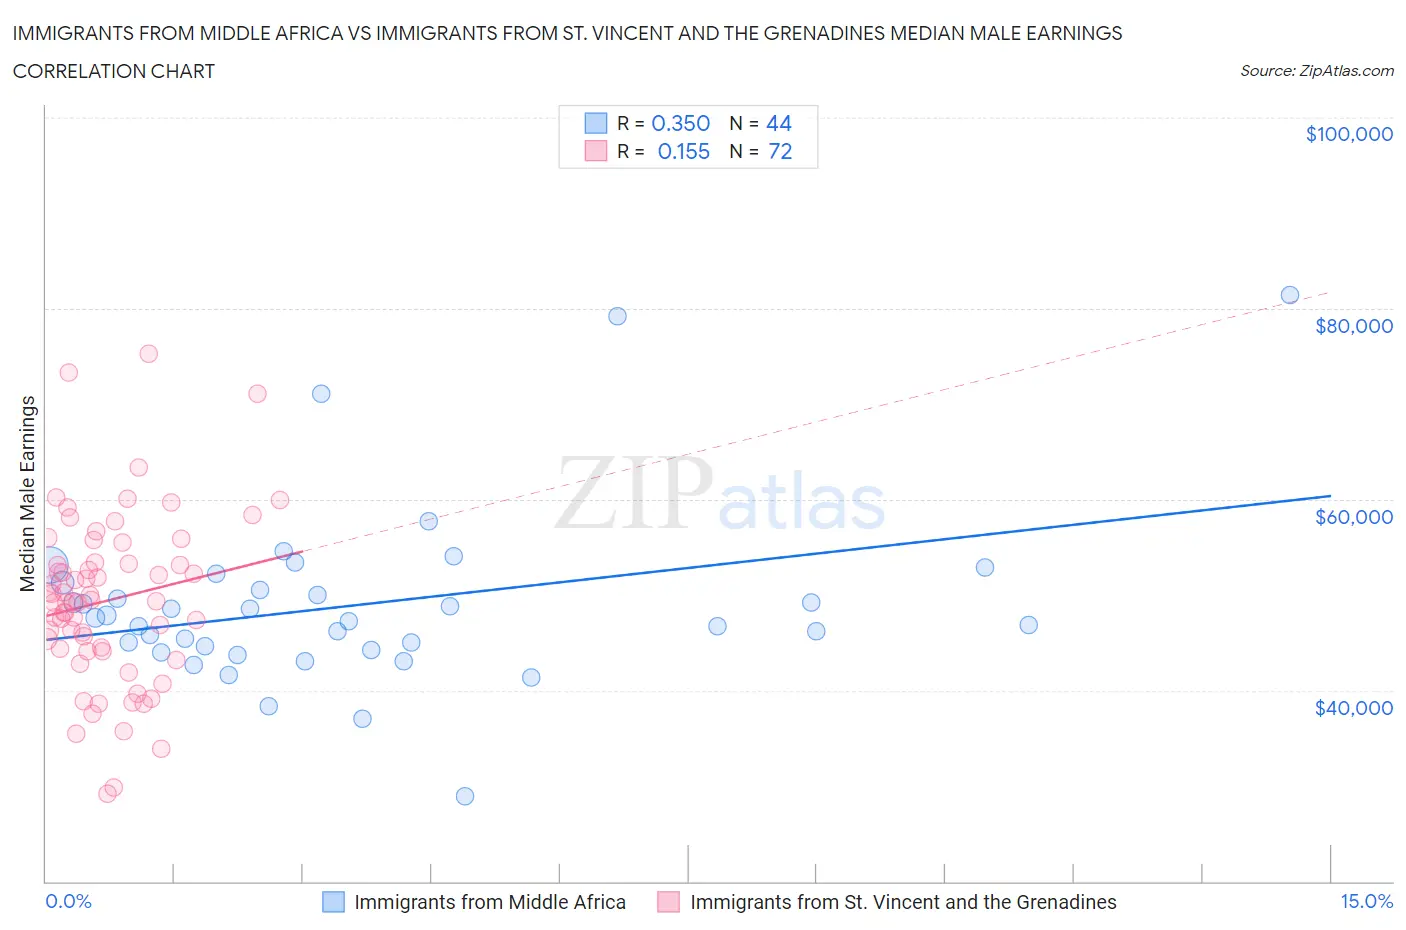 Immigrants from Middle Africa vs Immigrants from St. Vincent and the Grenadines Median Male Earnings